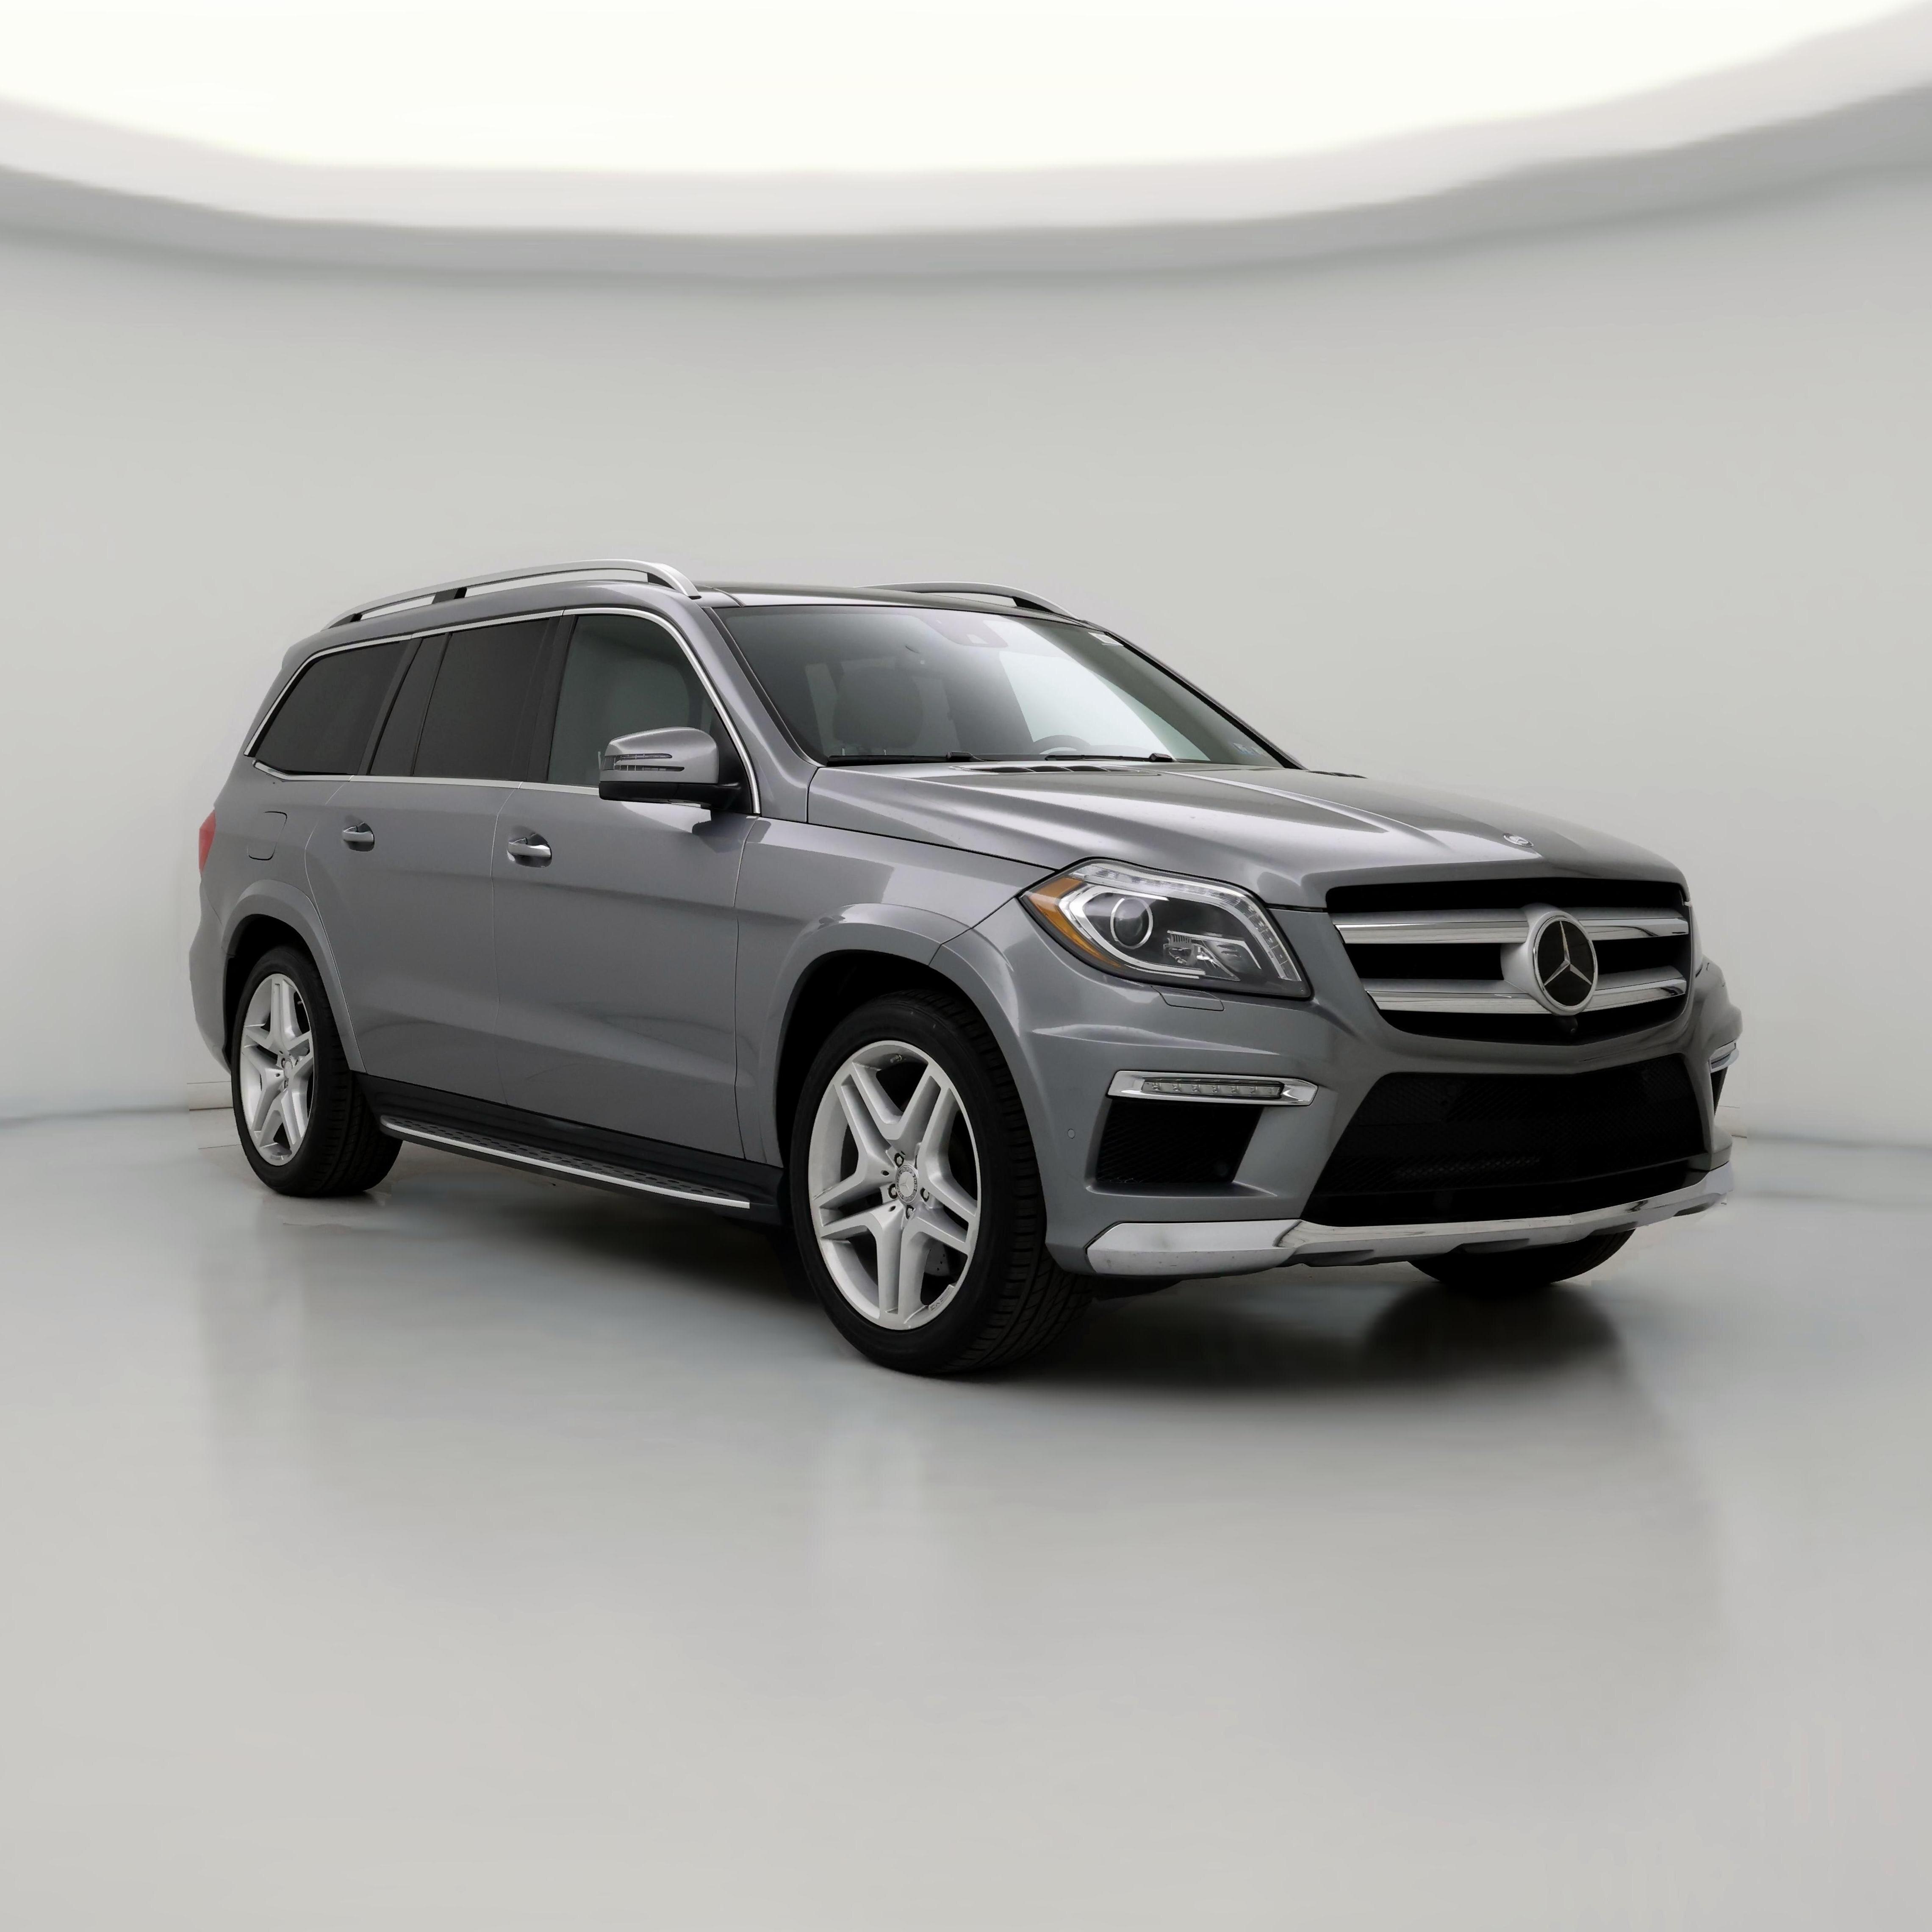 Used Mercedes-Benz GL550 for Sale